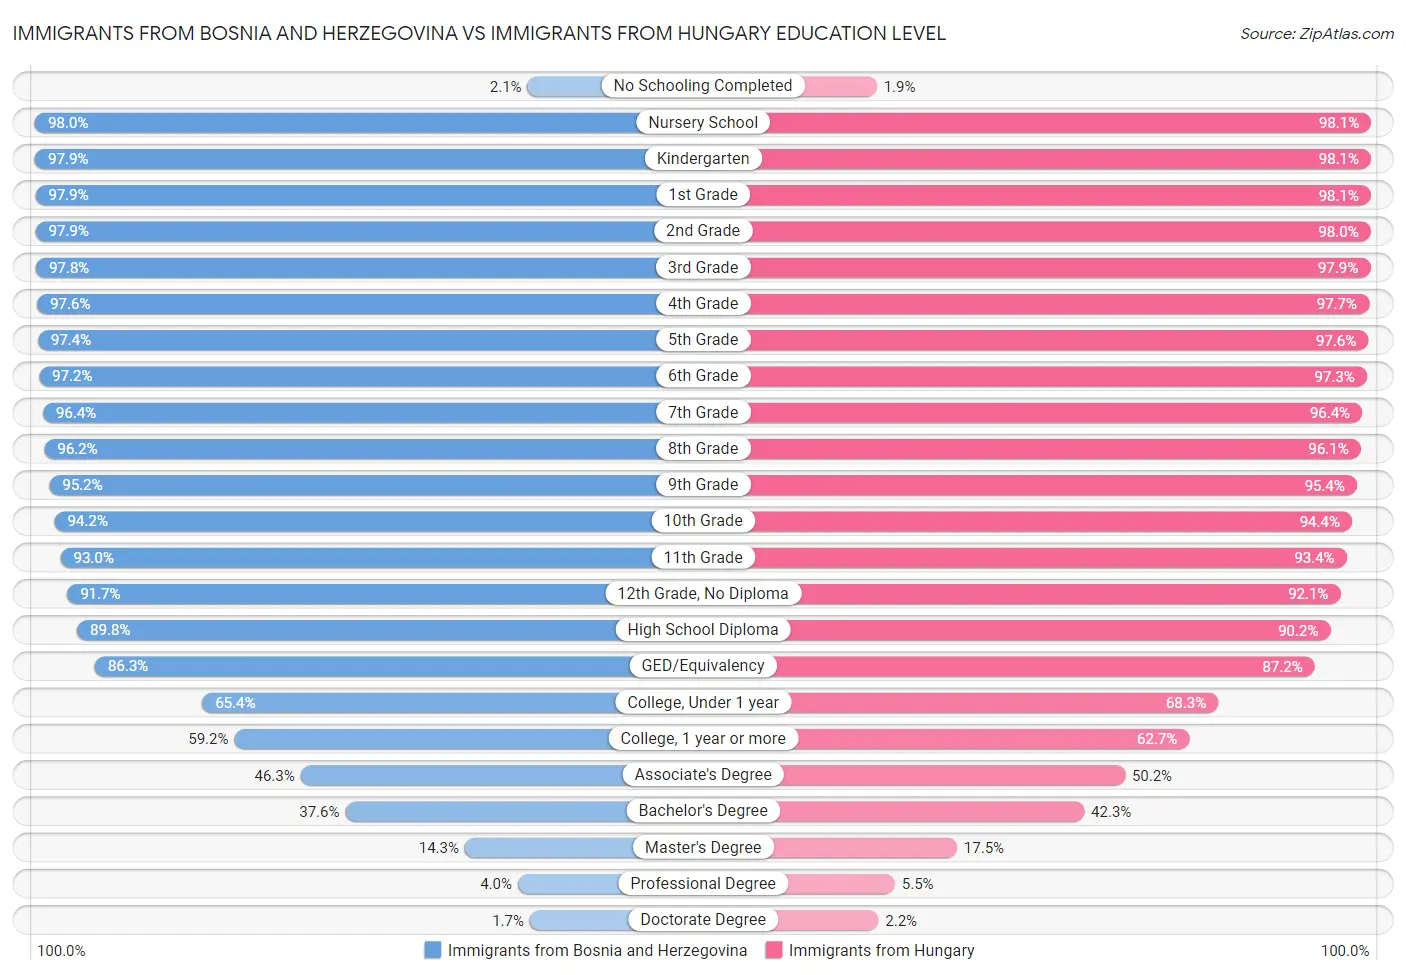 Immigrants from Bosnia and Herzegovina vs Immigrants from Hungary Education Level